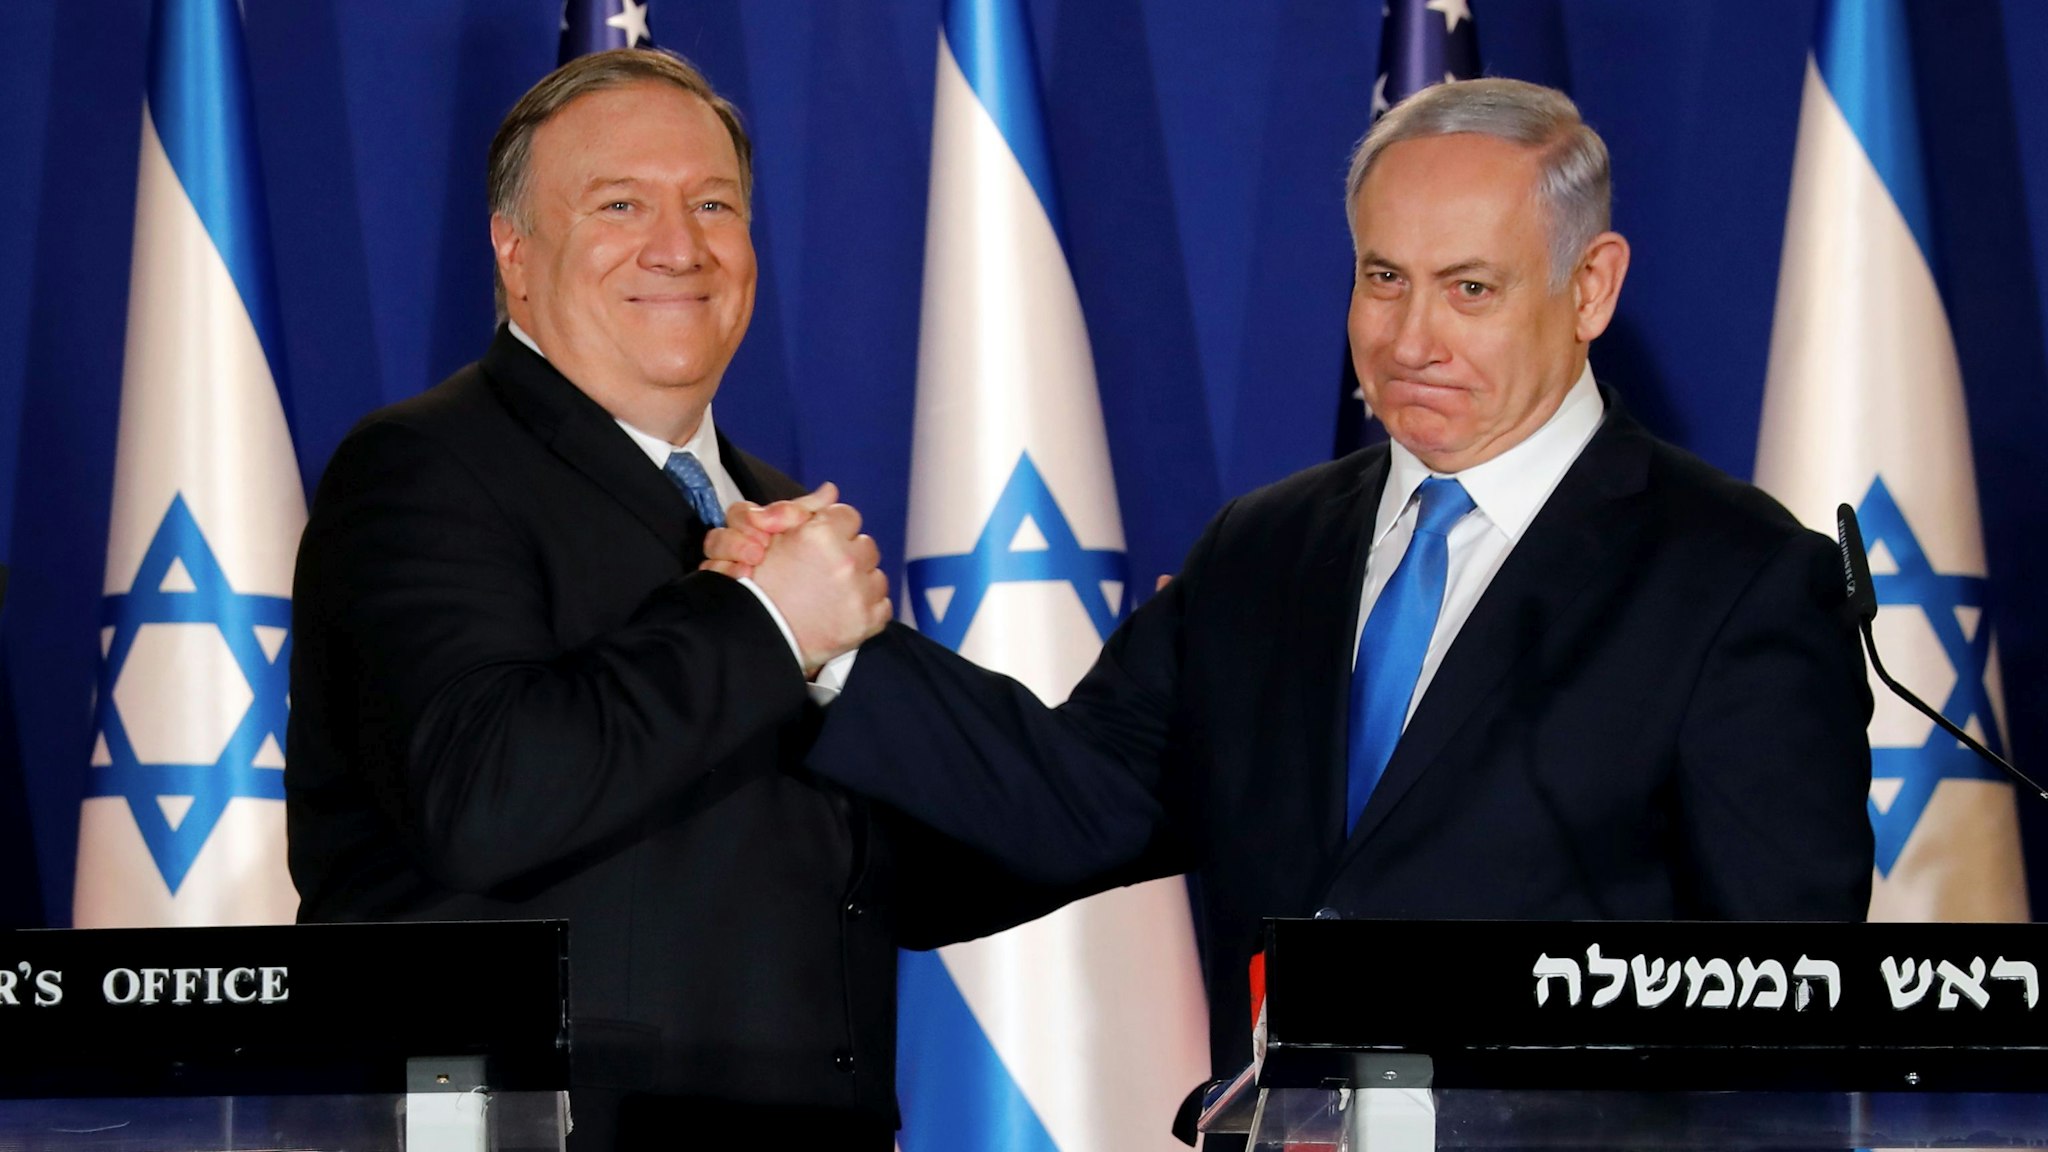 Israeli Prime Minister Benjamin Netanyahu (R) welcomes US Secretary of State Mike Pompeo to his residence in Jerusalem on March 21, 2019. - Pompeo issued a thinly veiled jab at US Democrats over anti-Semitism, following controversial comments by a Muslim congresswoman over American support for Israel.